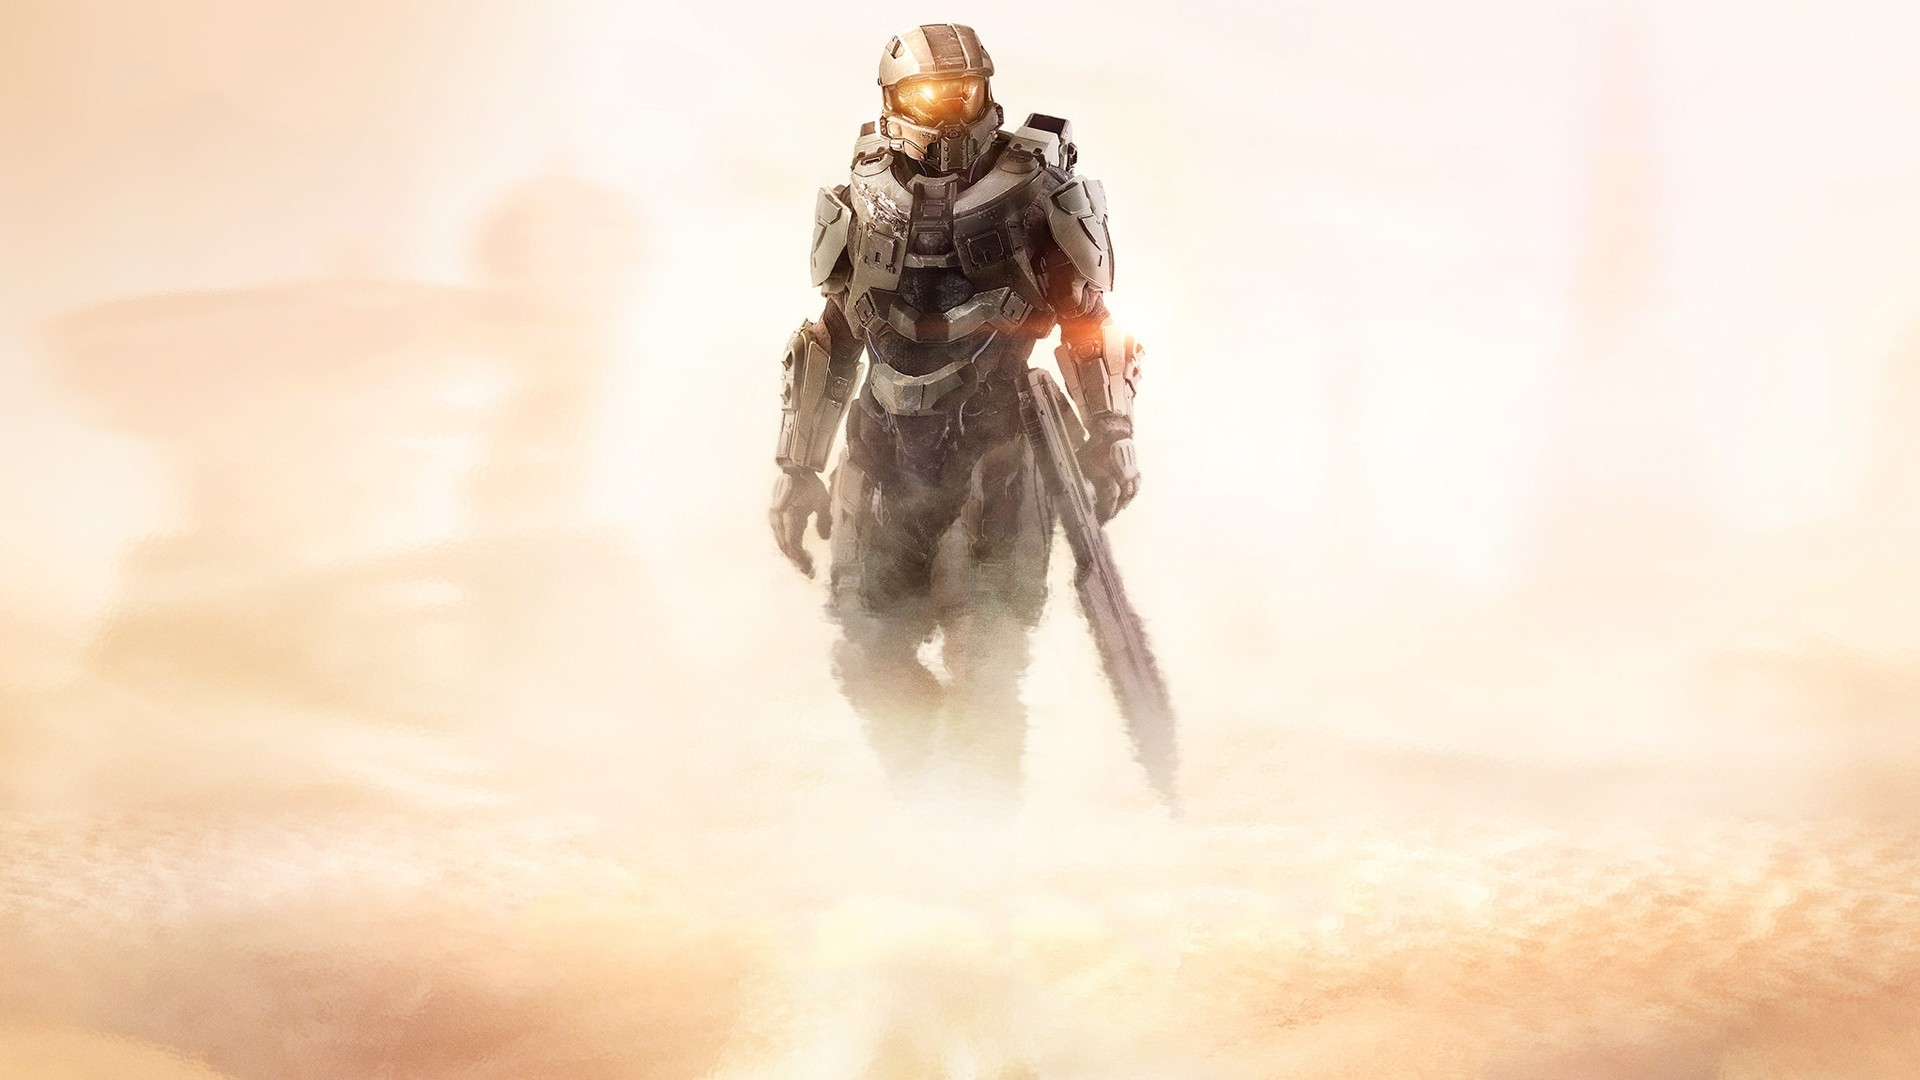 Halo 5 Guardians for 1920 x 1080 HDTV 1080p resolution